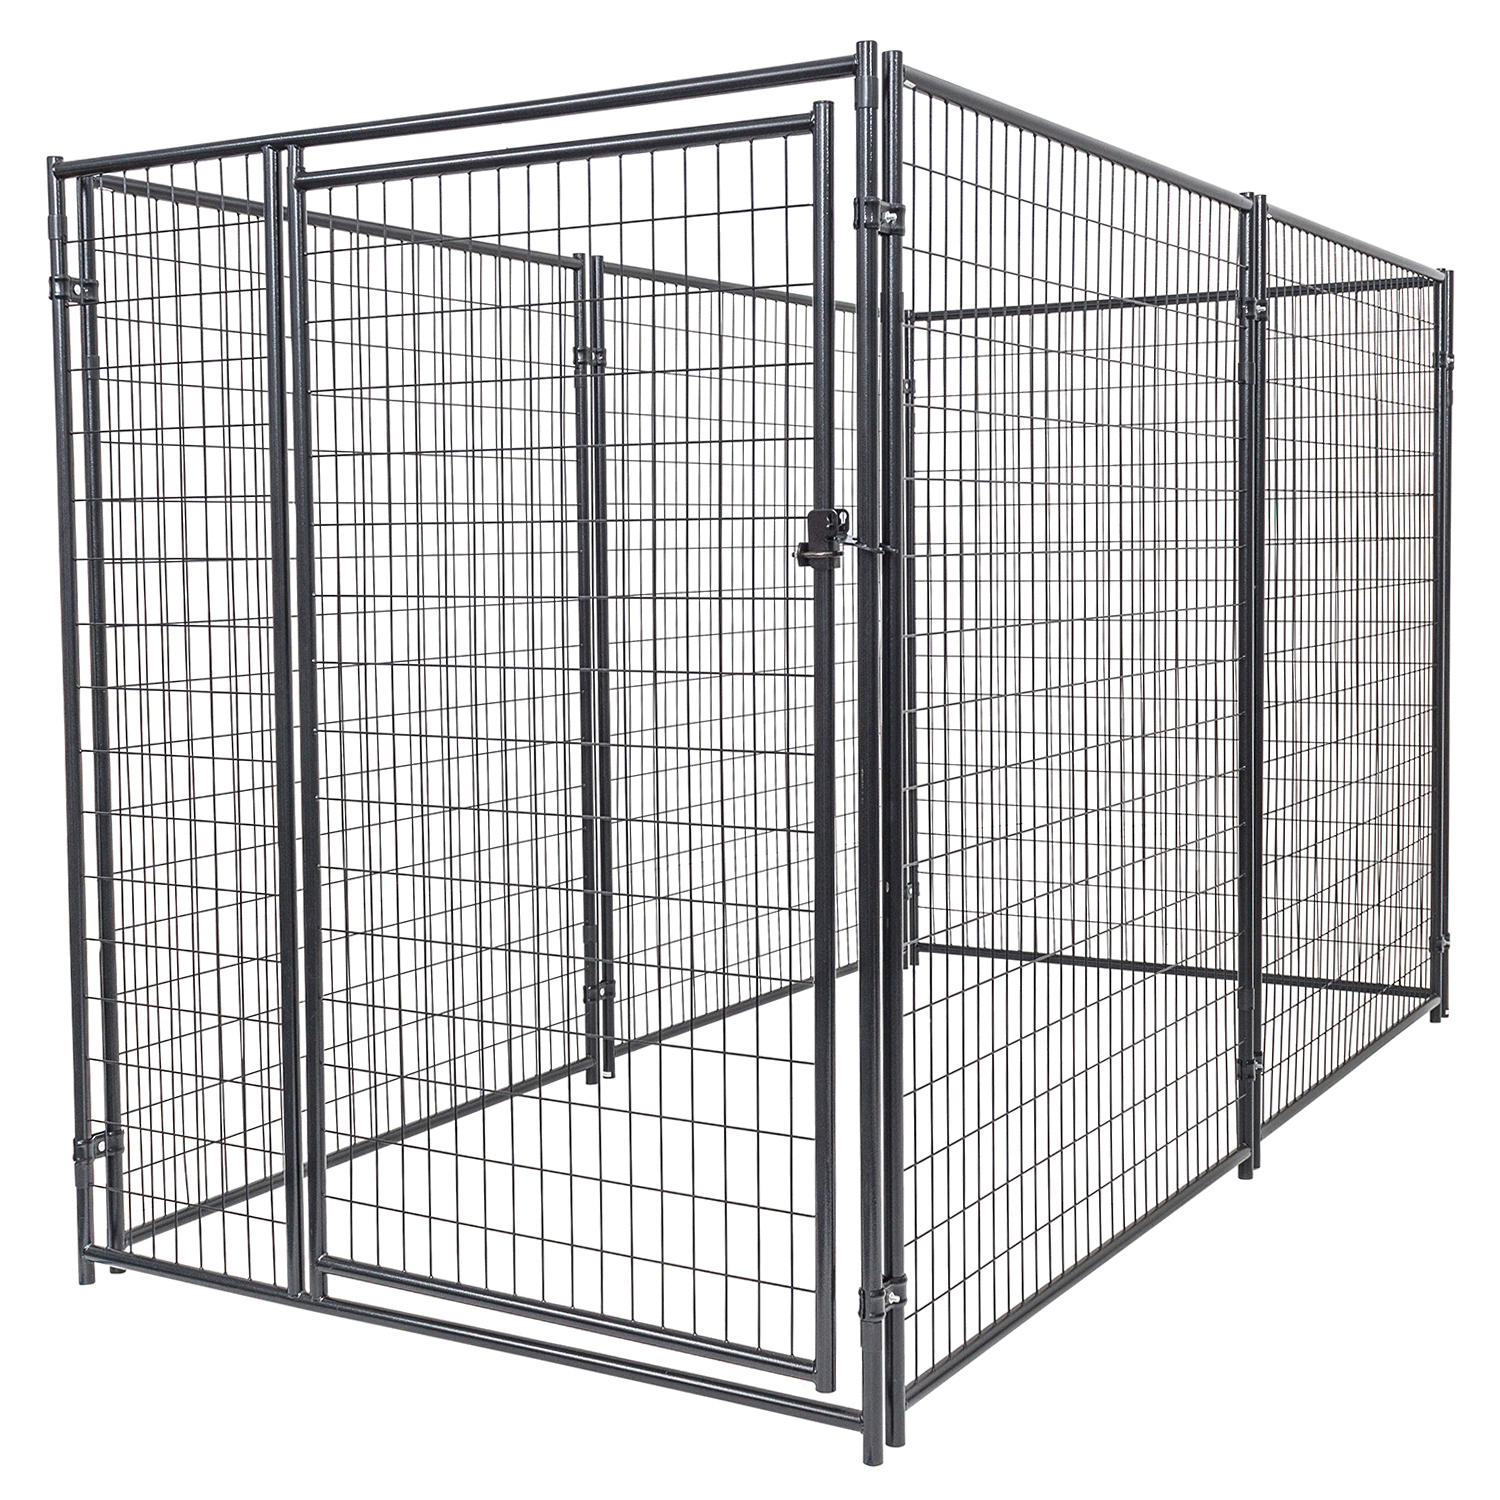 Lucky Dog Modular Kennel Welded Wire Kit (10’L x 5’W x 6’H)